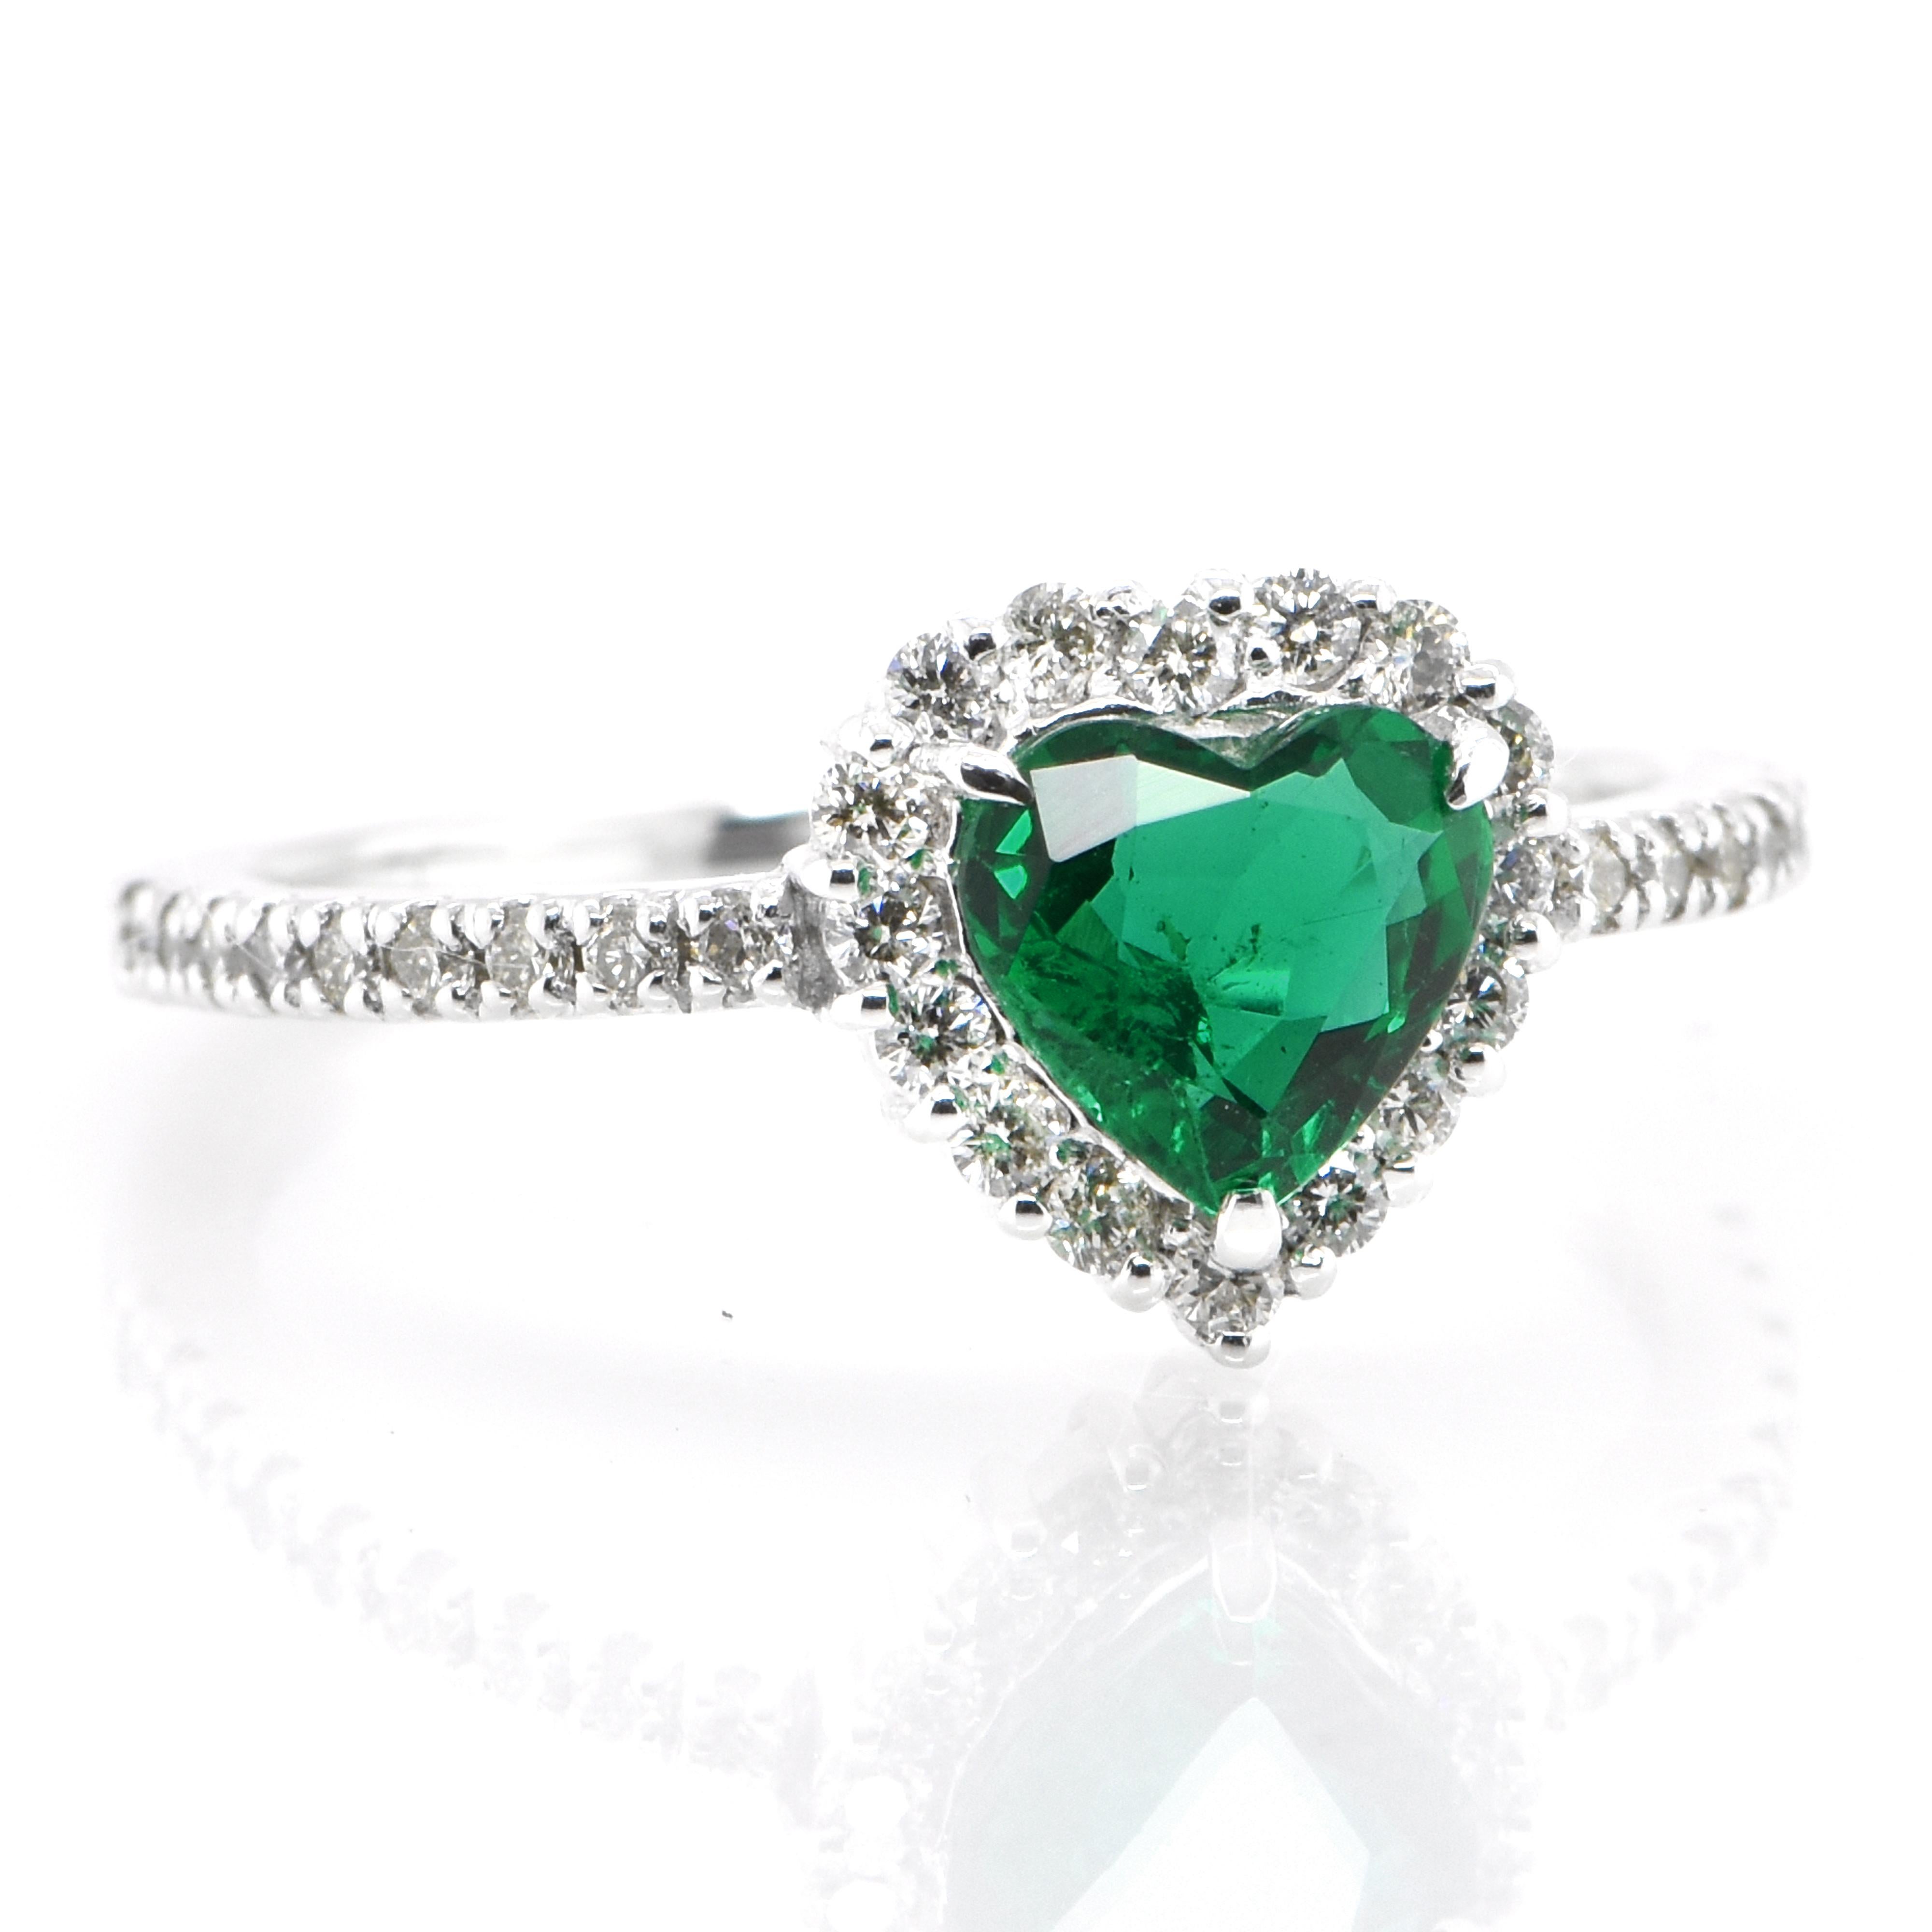 A stunning ring featuring a 0.63 Carat Natural, Heart-Shape, Zambian Emerald and 0.27 Carats of Diamond Accents set in Platinum as well as 18 Karat Yellow Gold. People have admired emerald’s green for thousands of years. Emeralds have always been